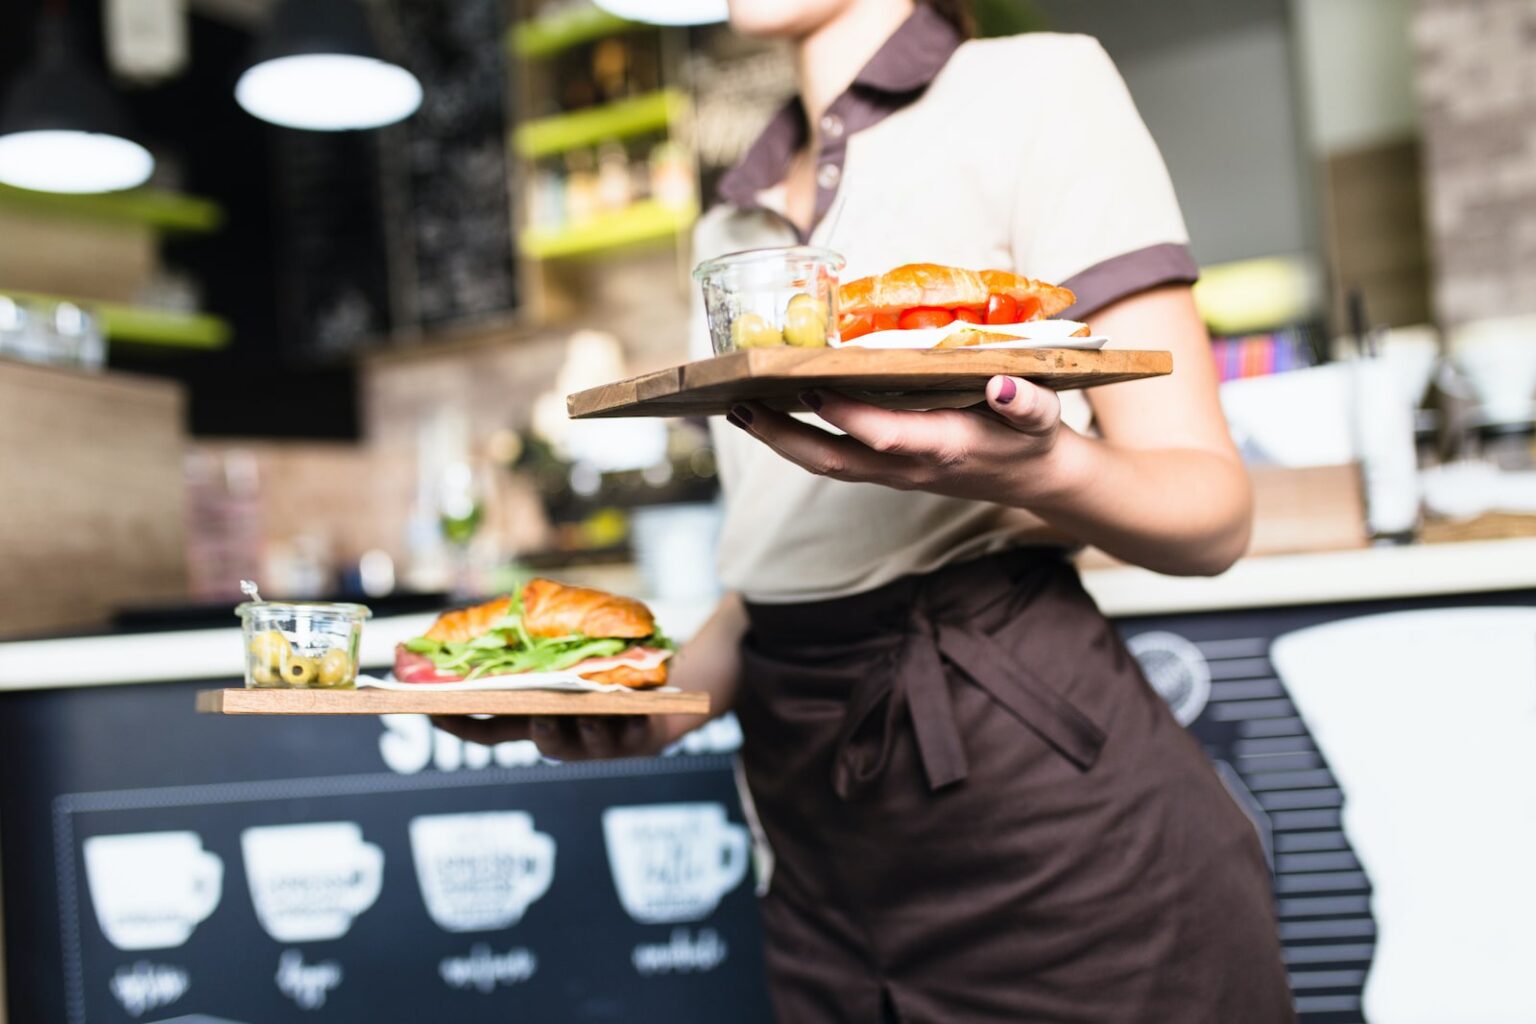 Ready to start a franchise? As a restaurant owner, you must understand the business model, trademark, and processes that'll help you get the best results.